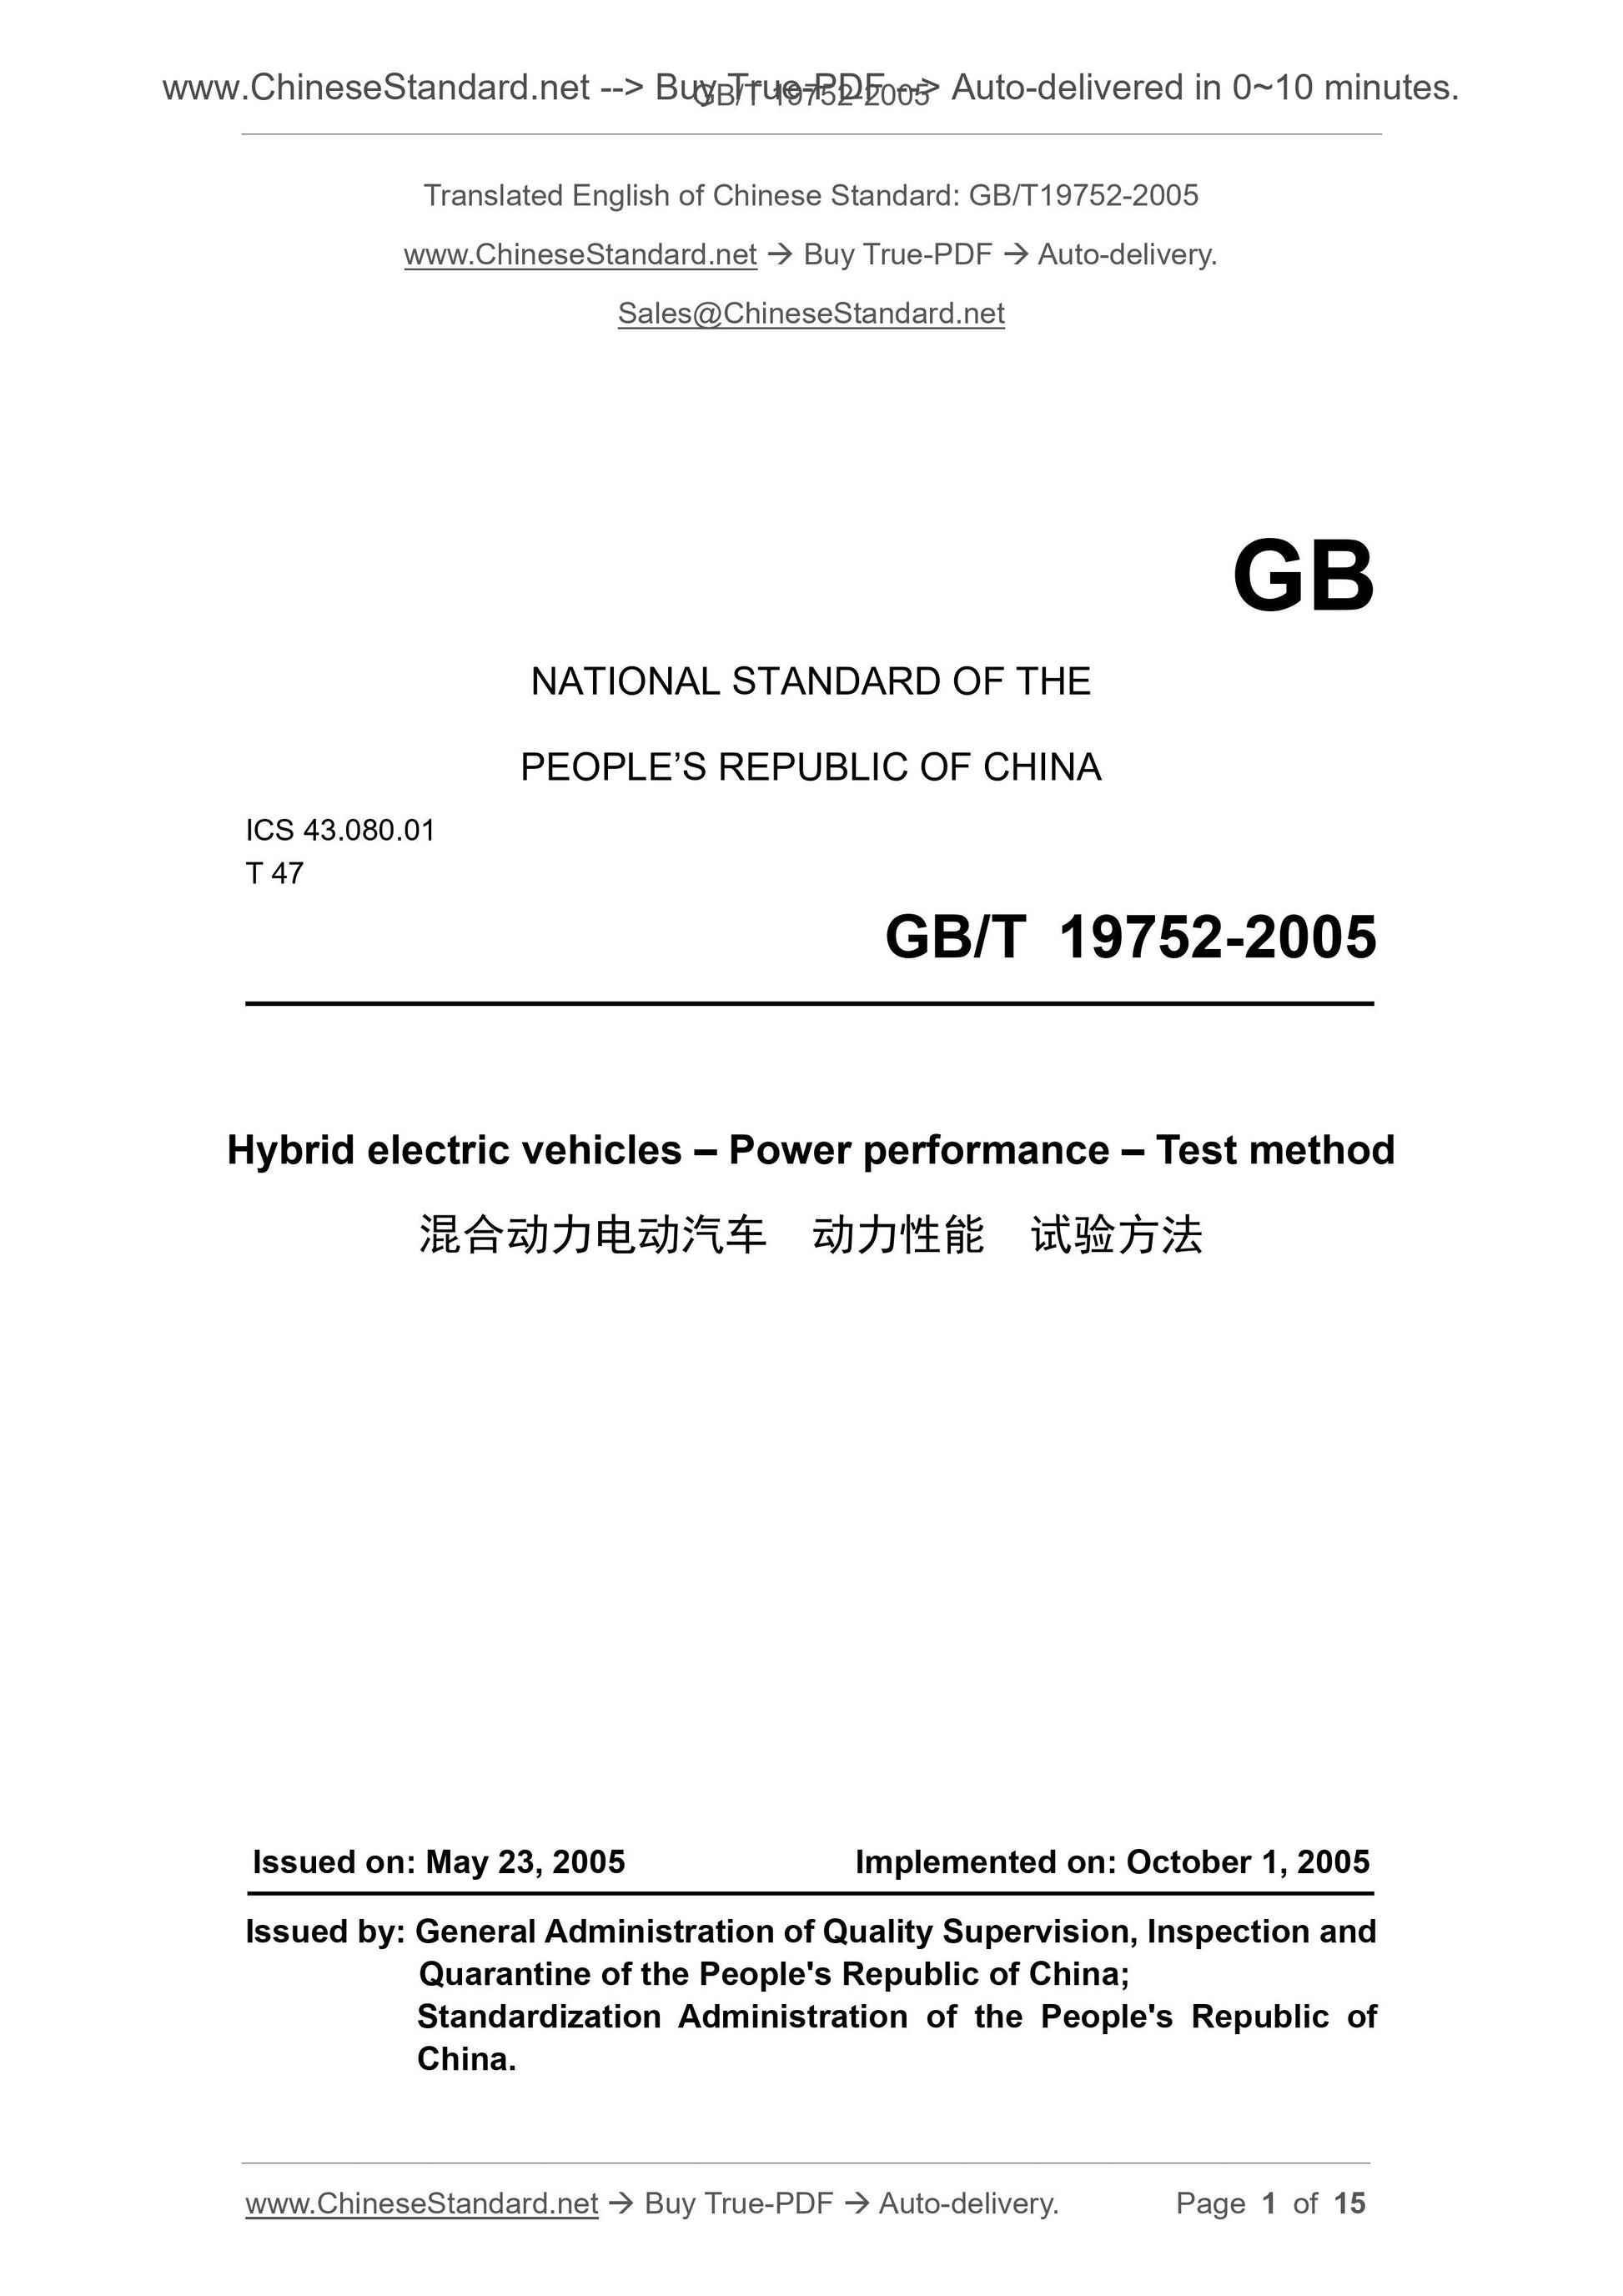 GB/T 19752-2005 Page 1